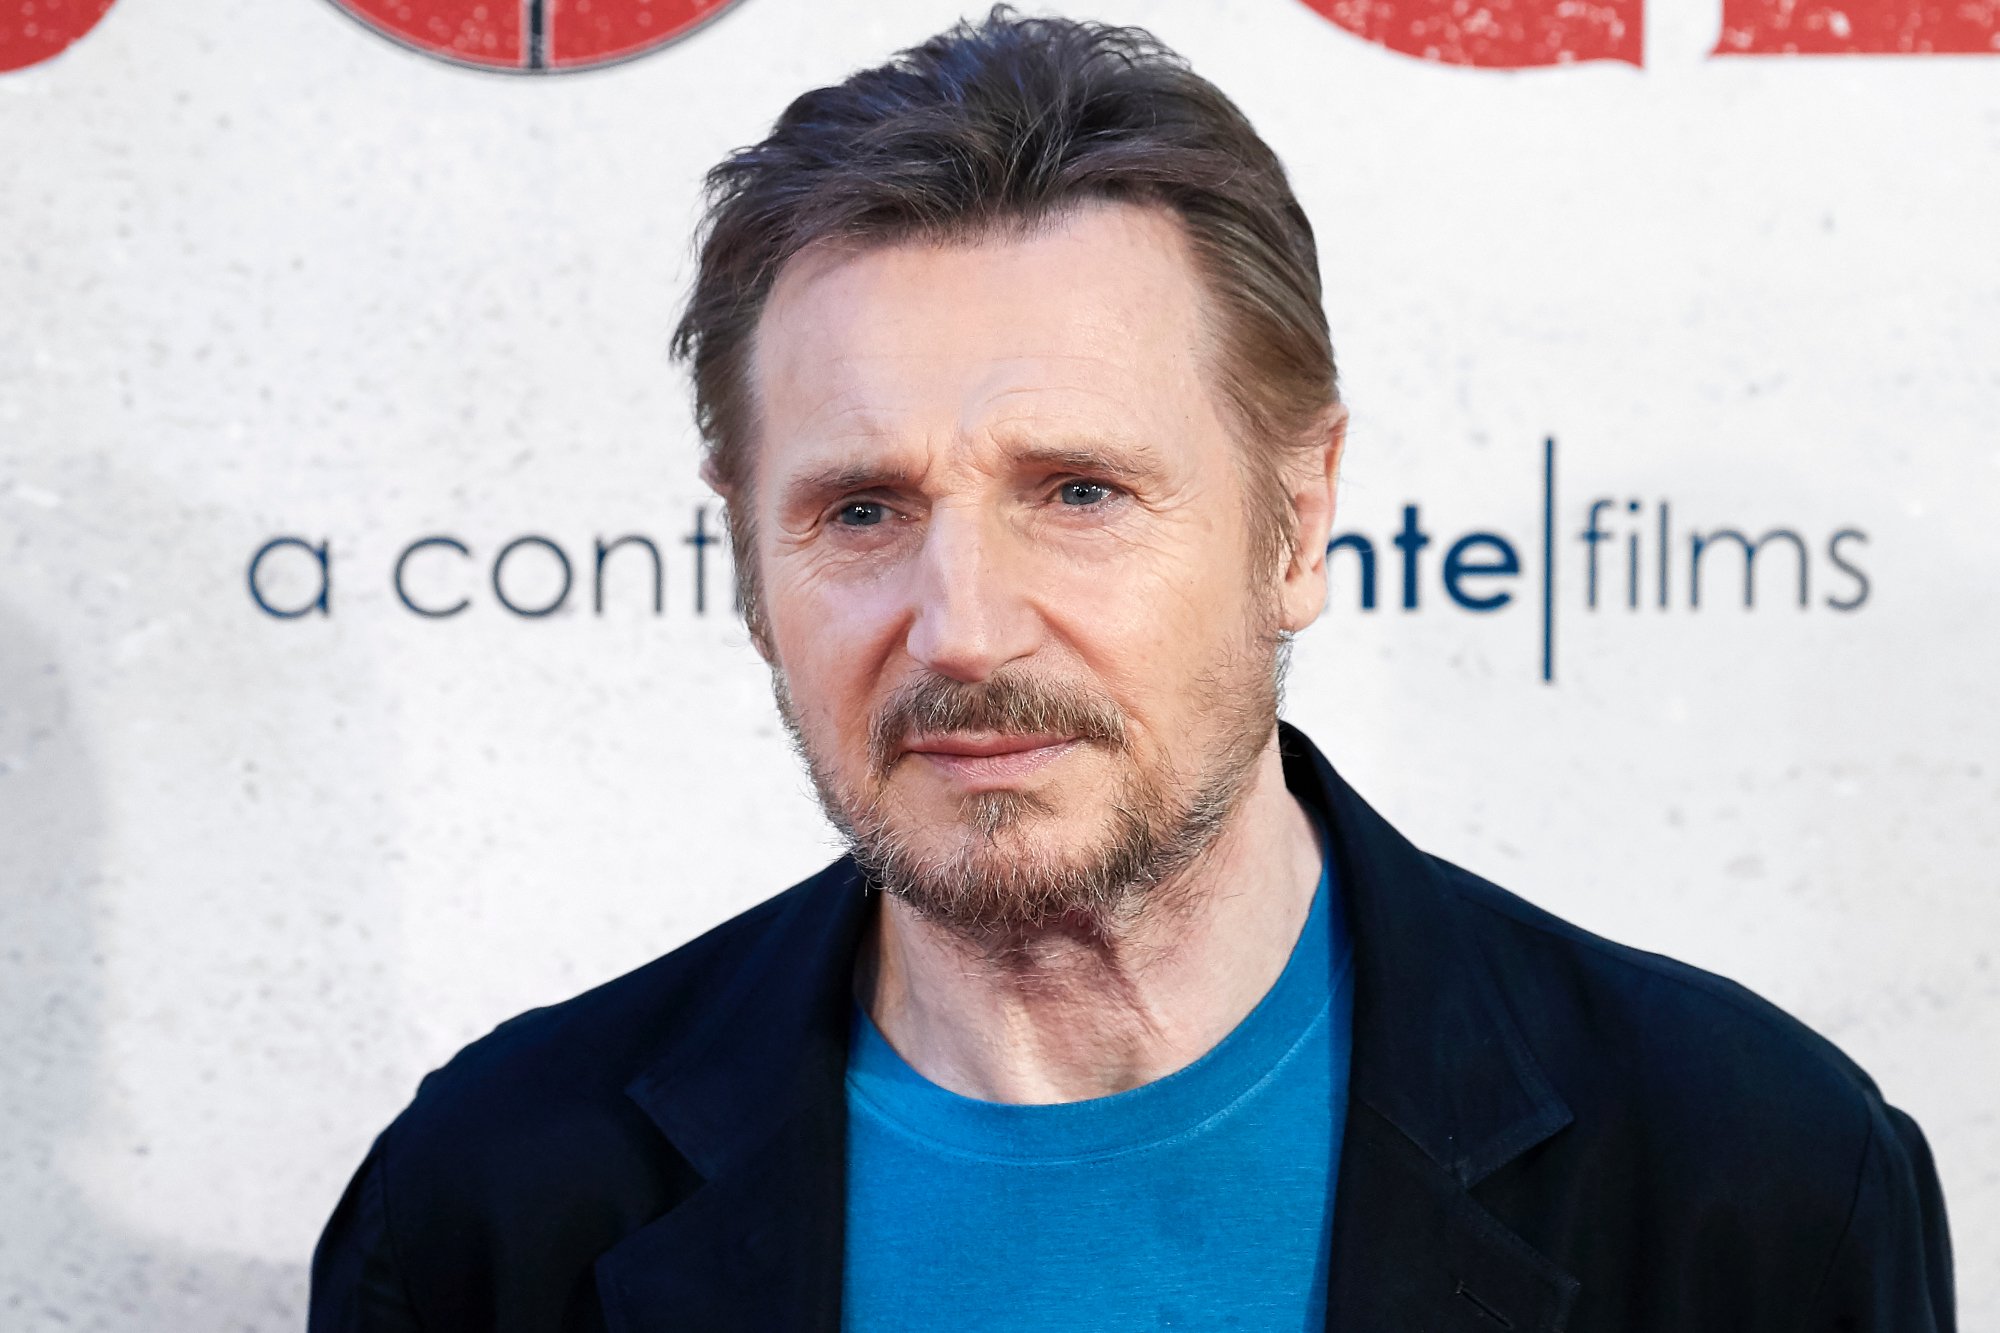 'A Million Ways to Die in the West' actor Liam Neeson with a blue shirt in front of a step and repeat